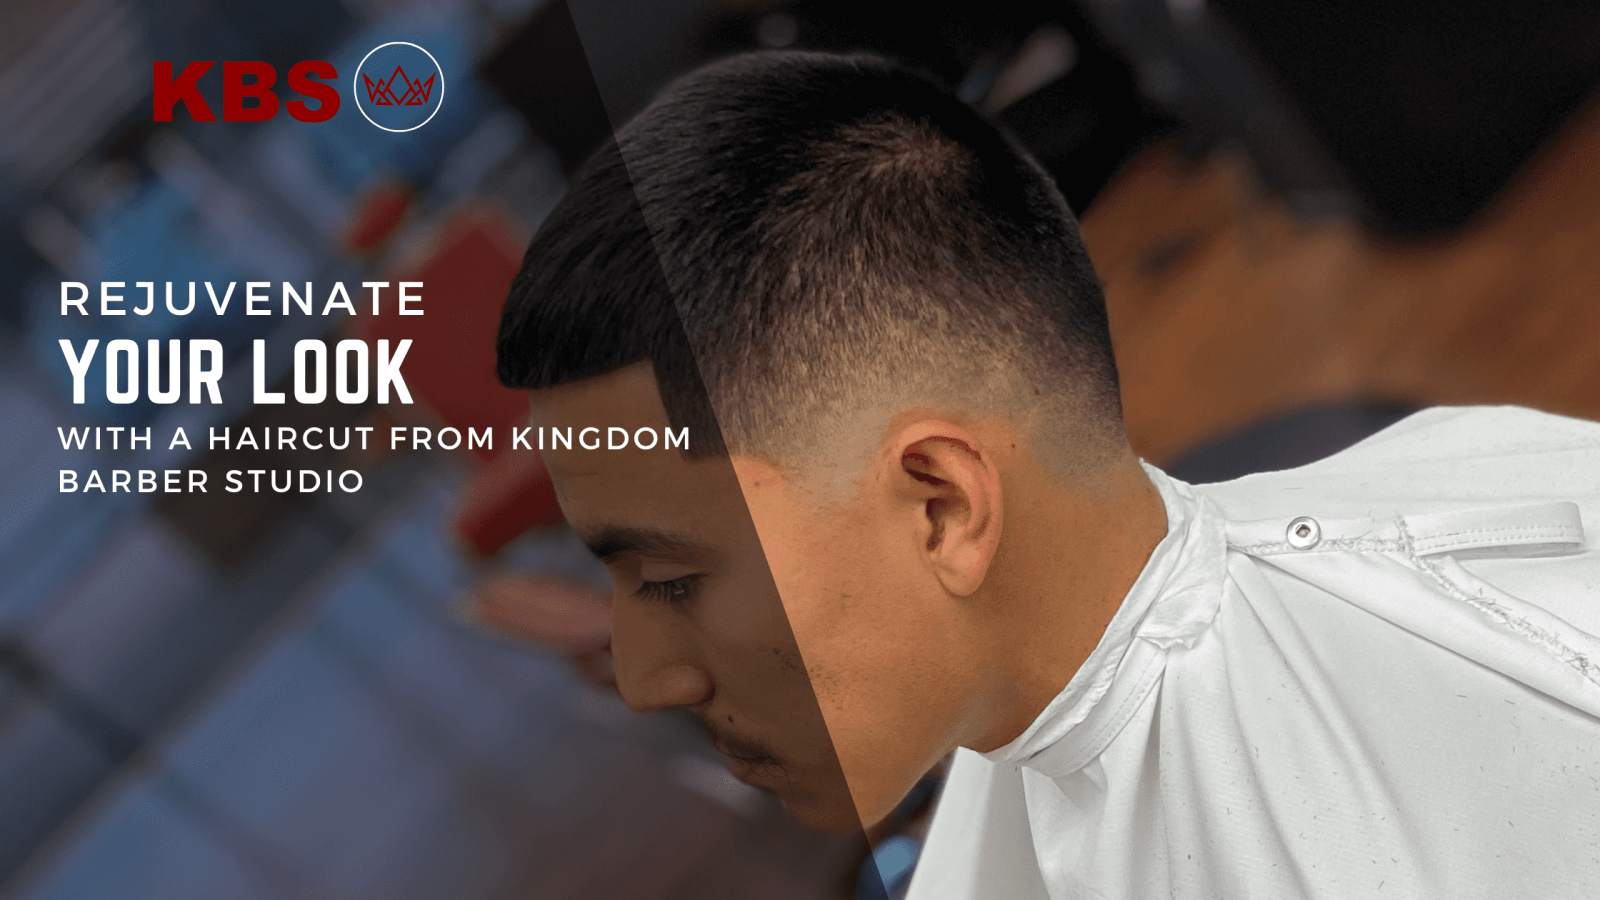 Rejuvenate Your Look With a Haircut From Kingdom Barber Studio